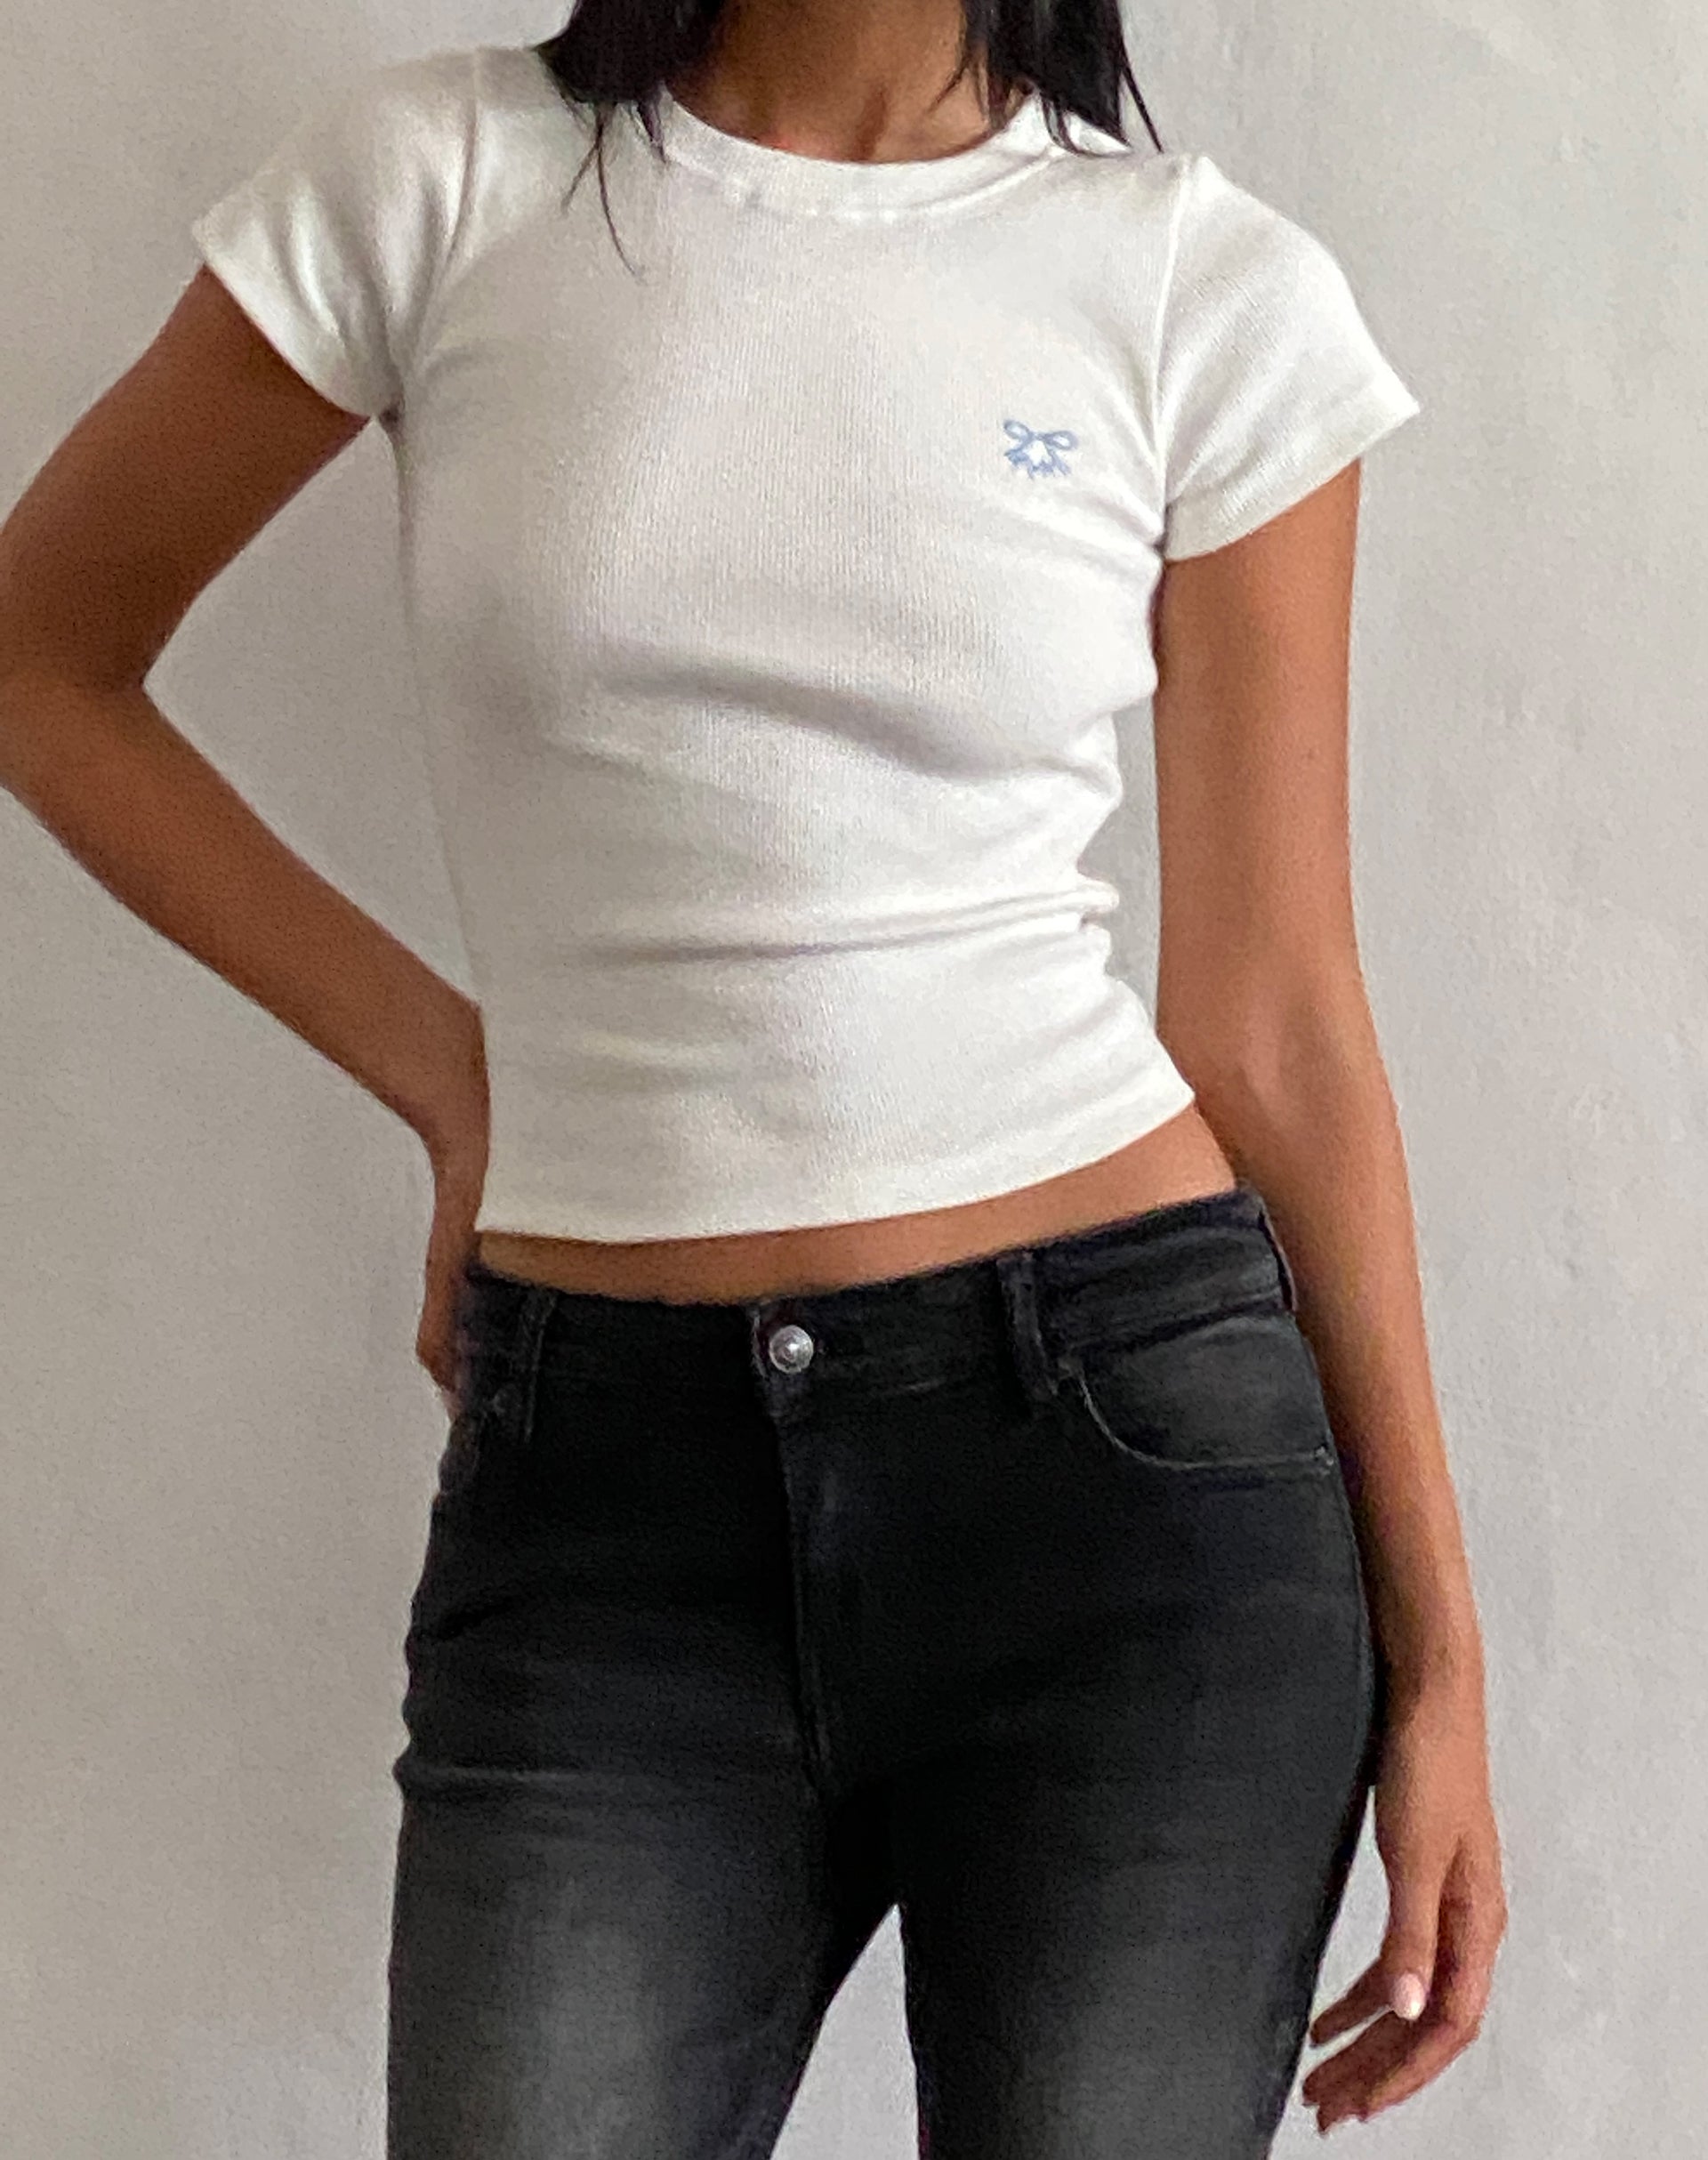 Image of Suti Ribbed Tee in Off White with Blue Bow M Embroidery